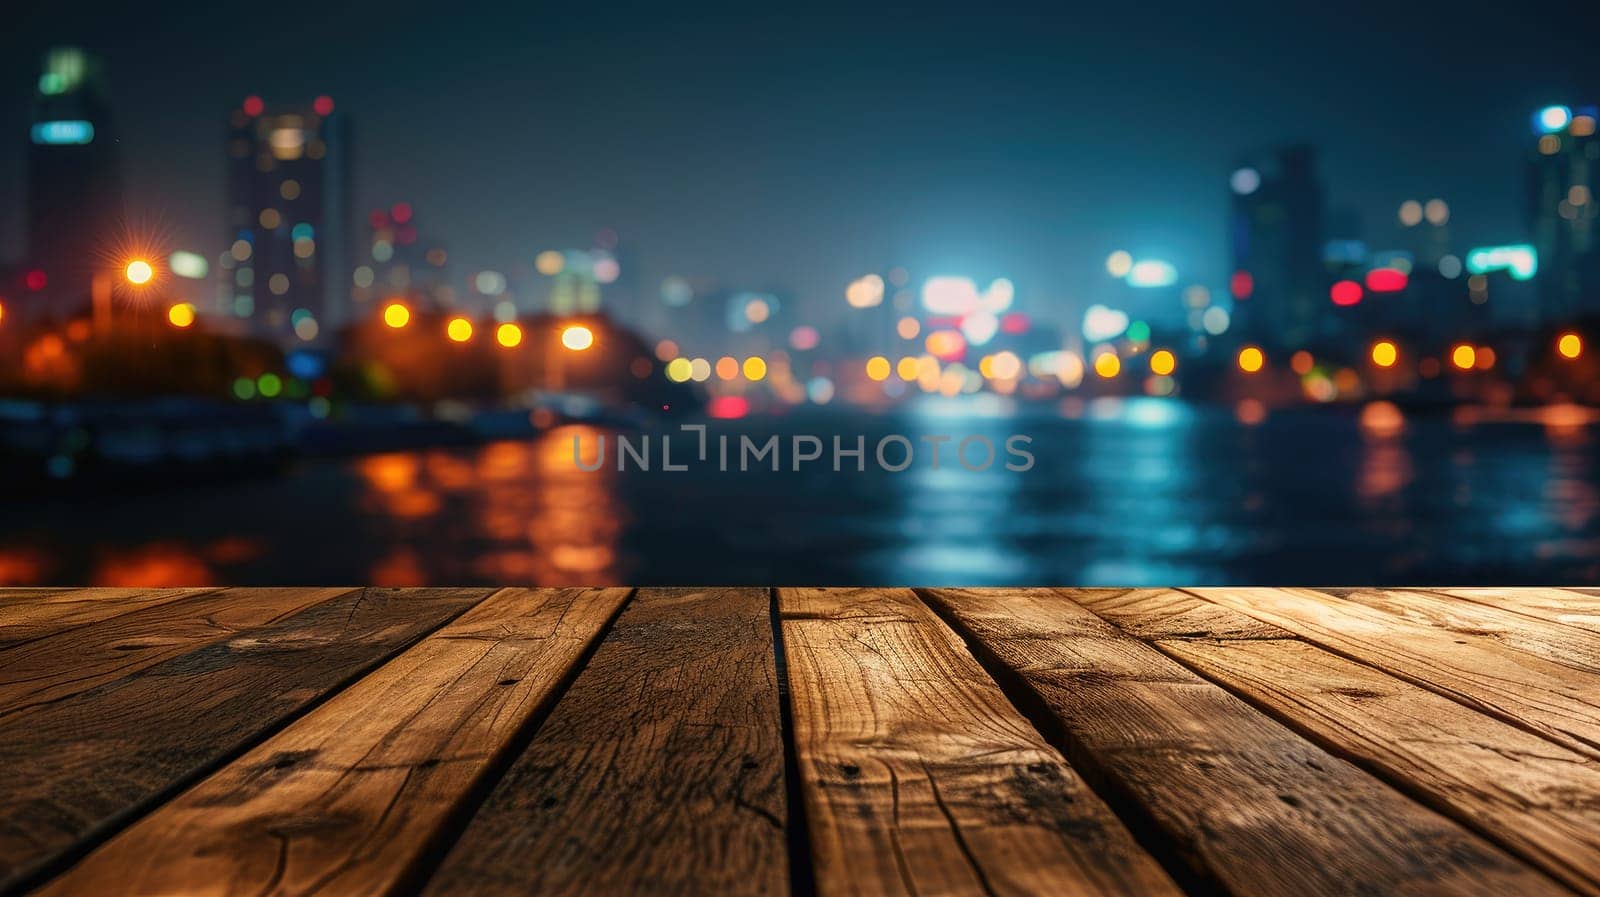 Blank wood tabletop with blurred night city skyline and river, showcase, nightlife,.